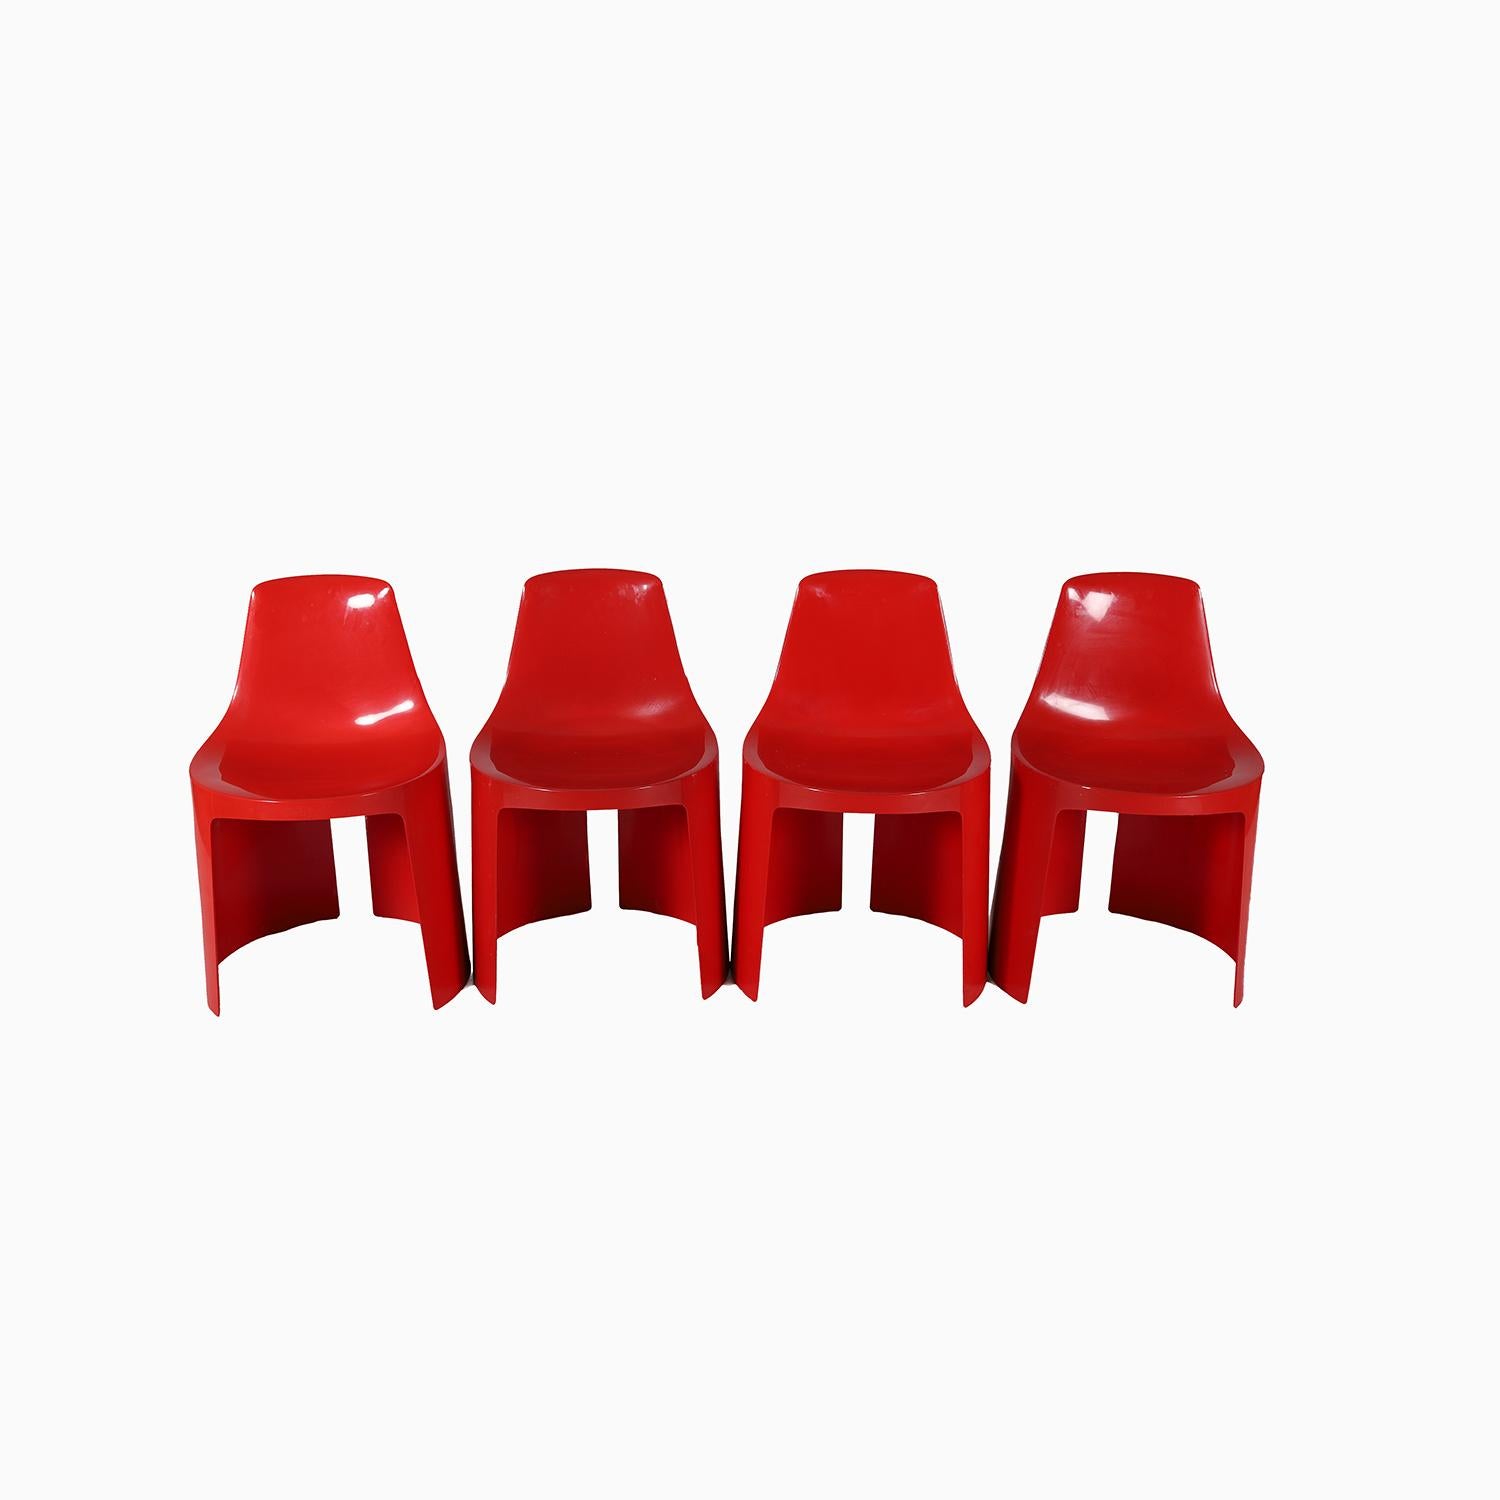 A set of 4 shiny molded plastic chairs in bright red.  Designed and produced in the mid- 20th Century by Umbo, designed by kay ReRoy Ruggles.  a cheery and space saving addition to any space.  Need a pop of color?  Look no further.  Excellent